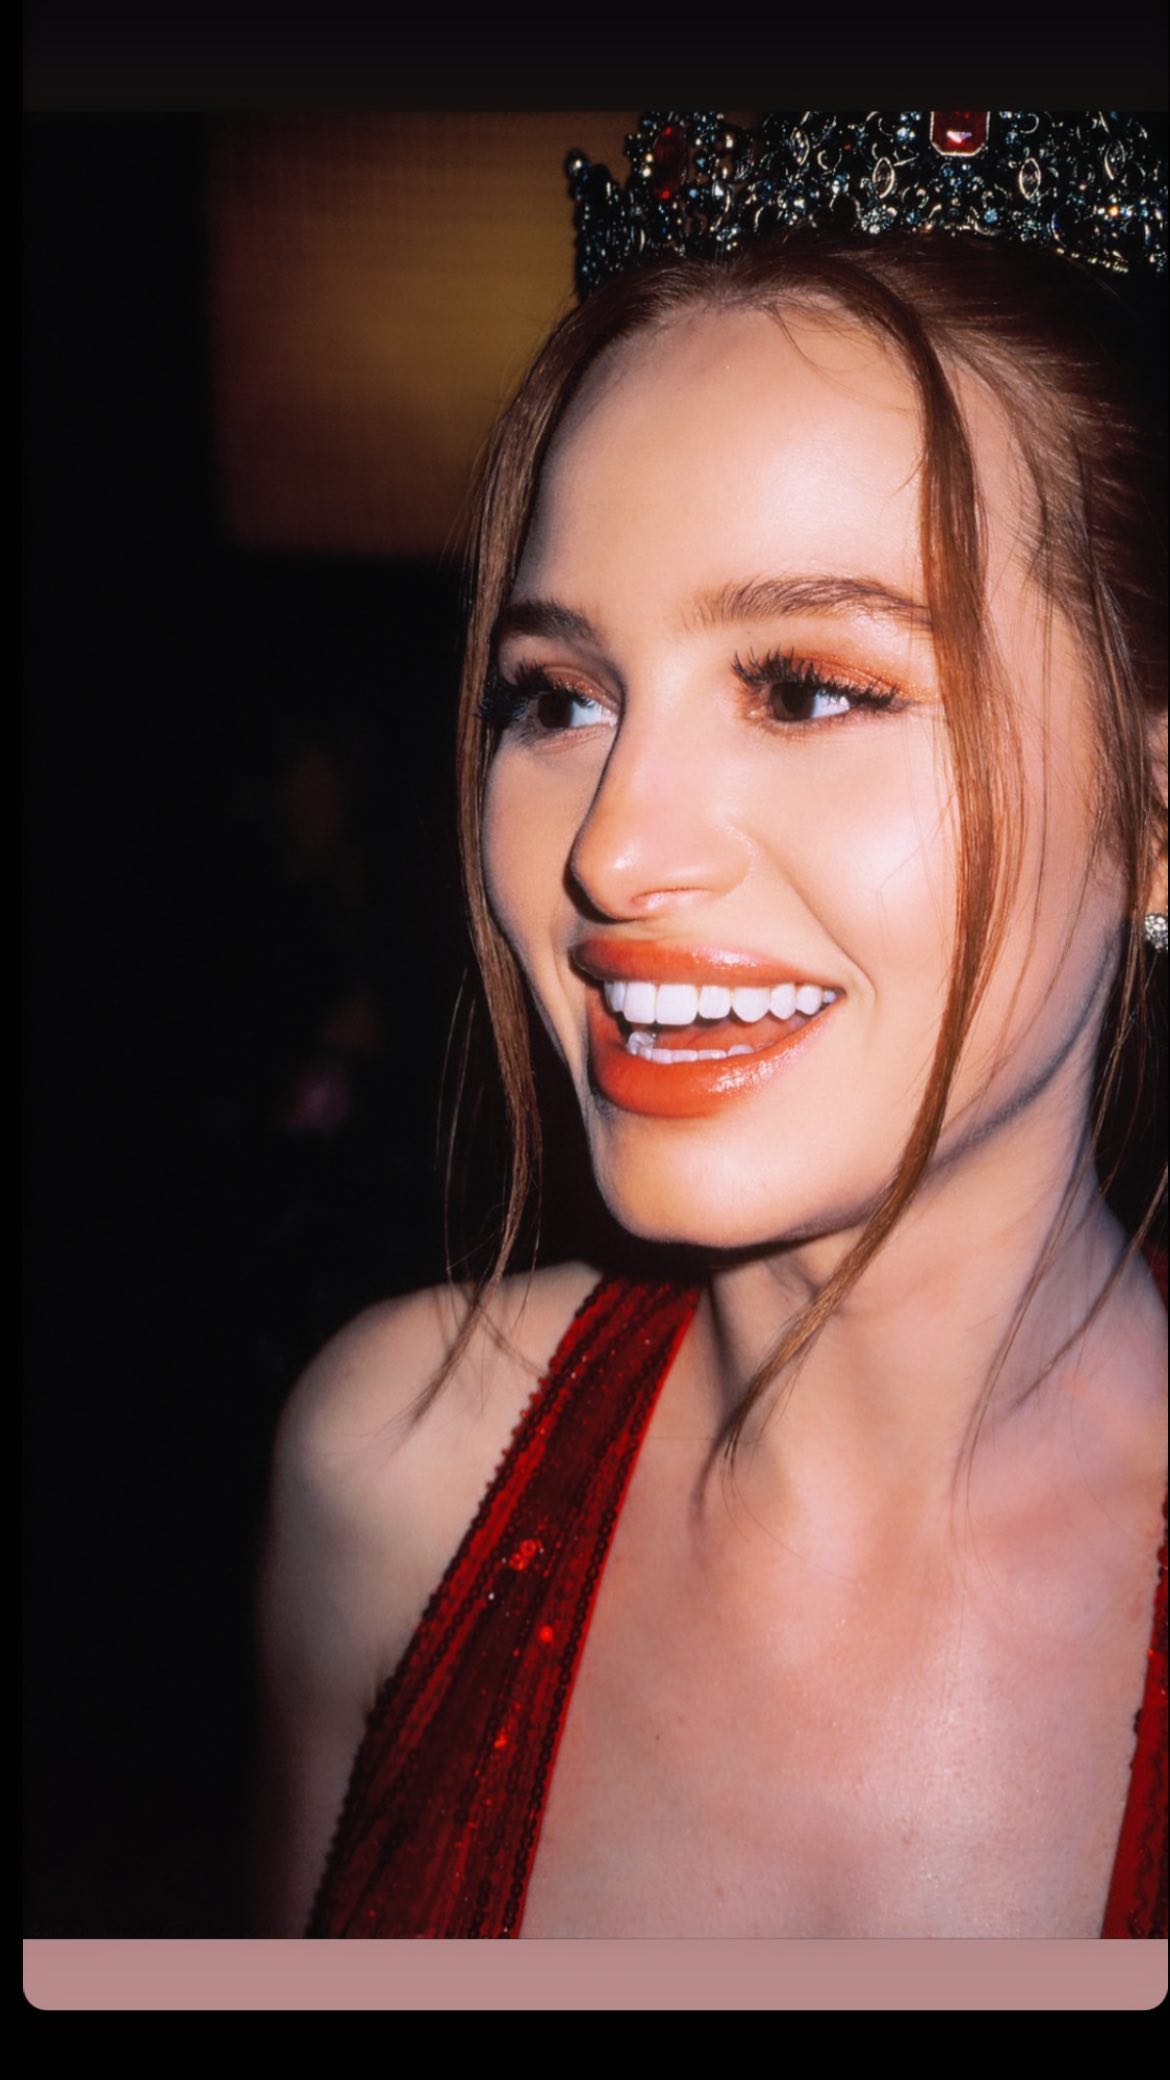 Photos n°2 : Madelaine Petsch Goes to Prom!